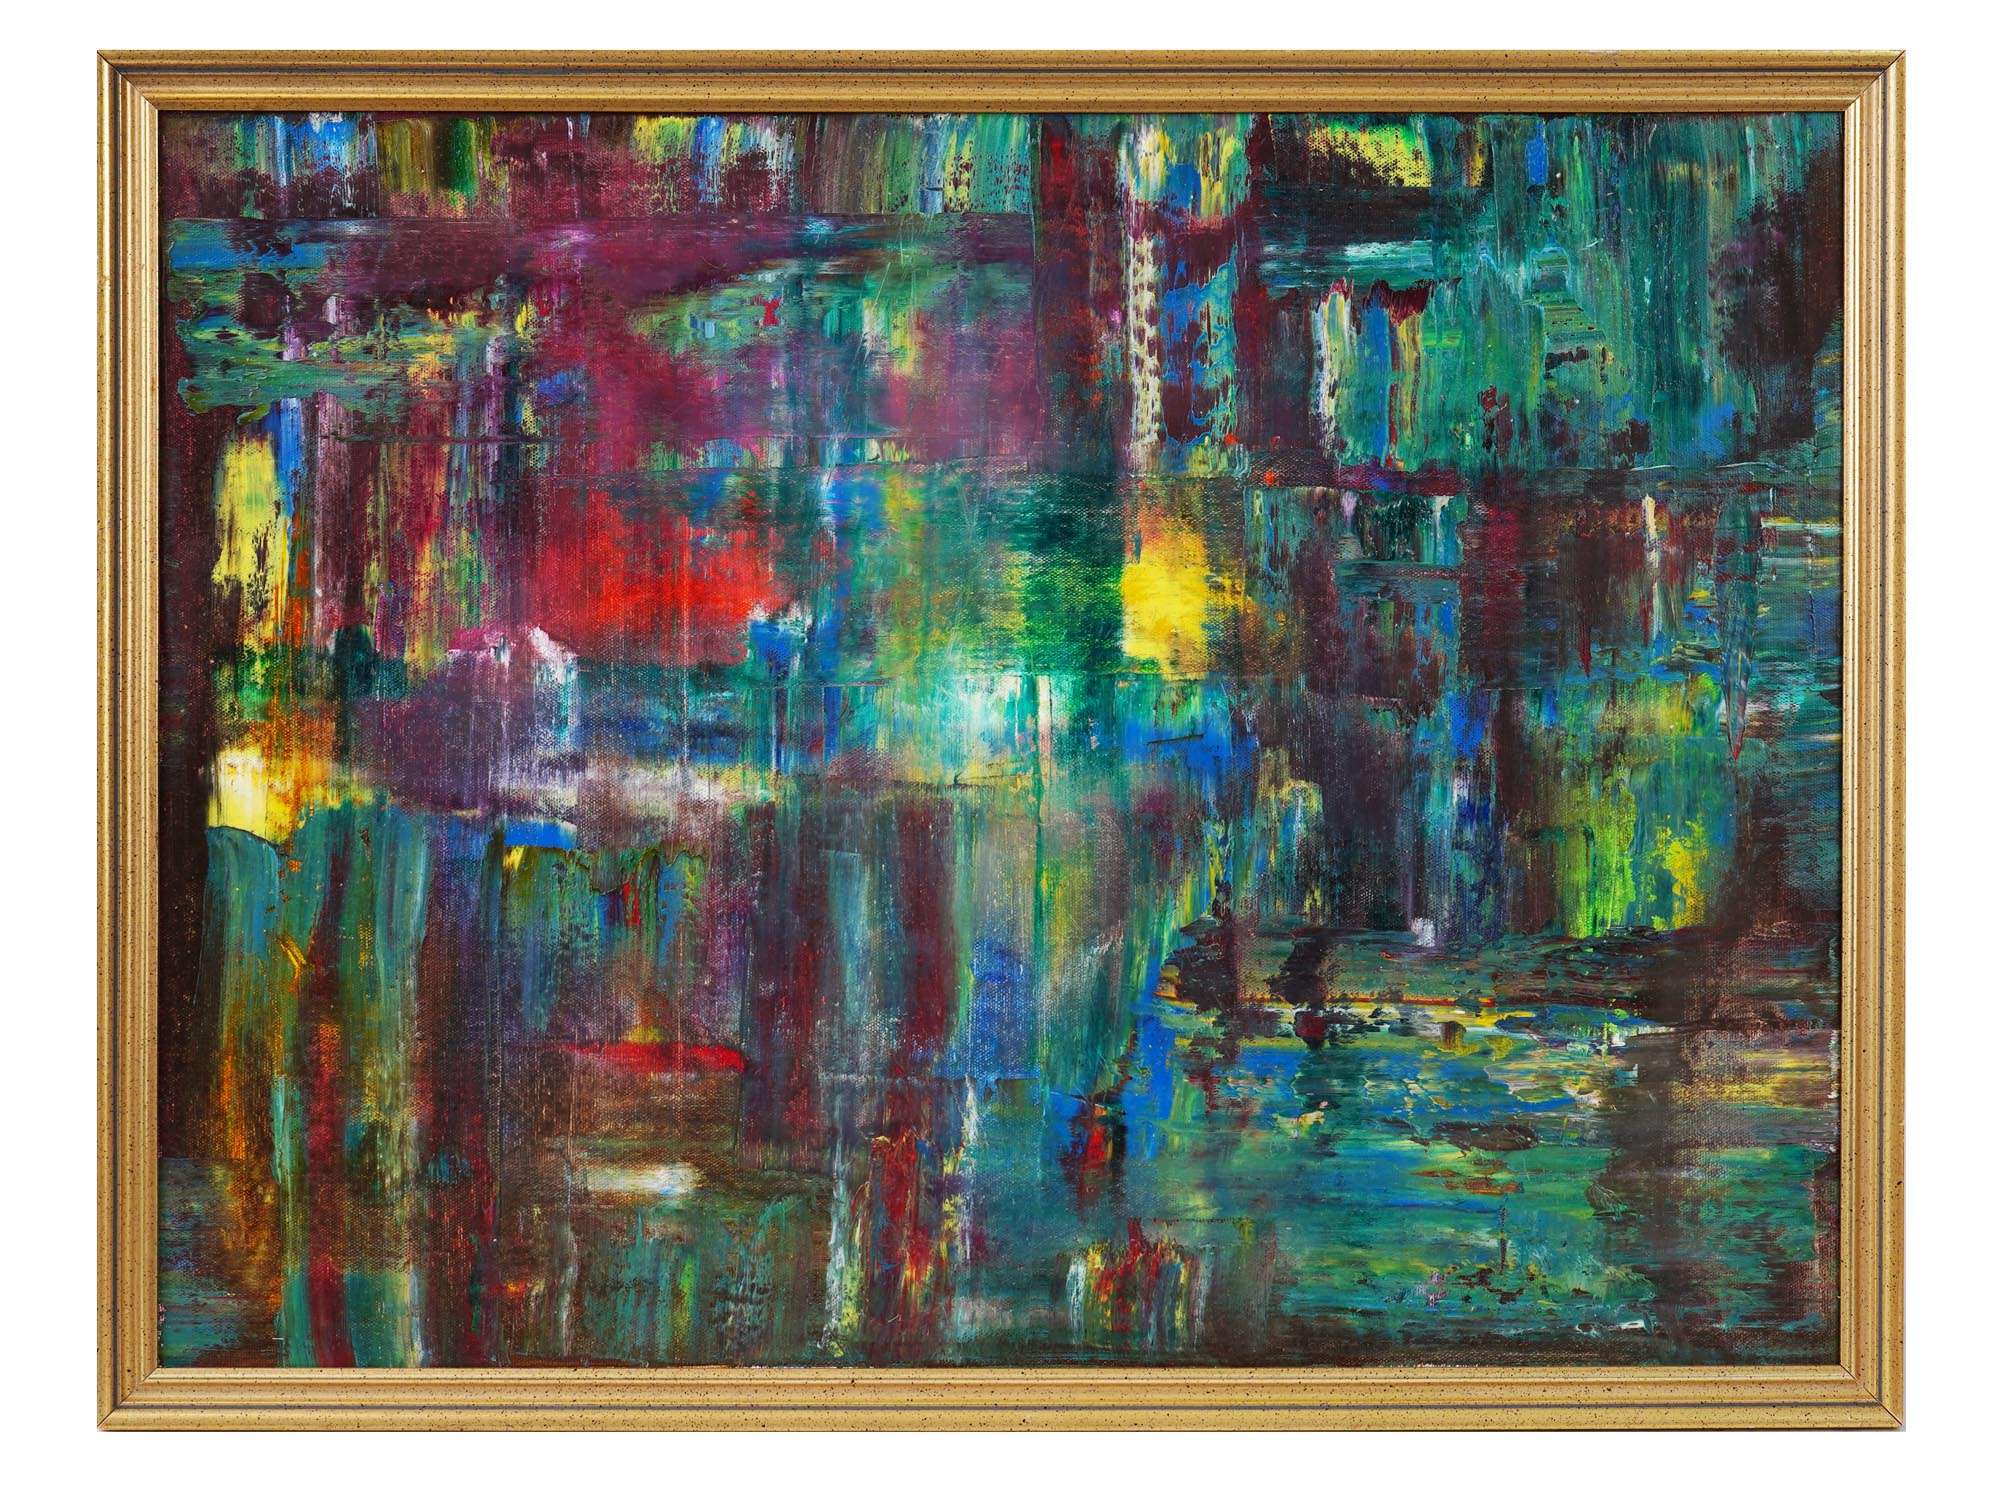 ATTRIBUTED TO GERHARD RICHTER ABSTRACT OIL PAINTING PIC-0